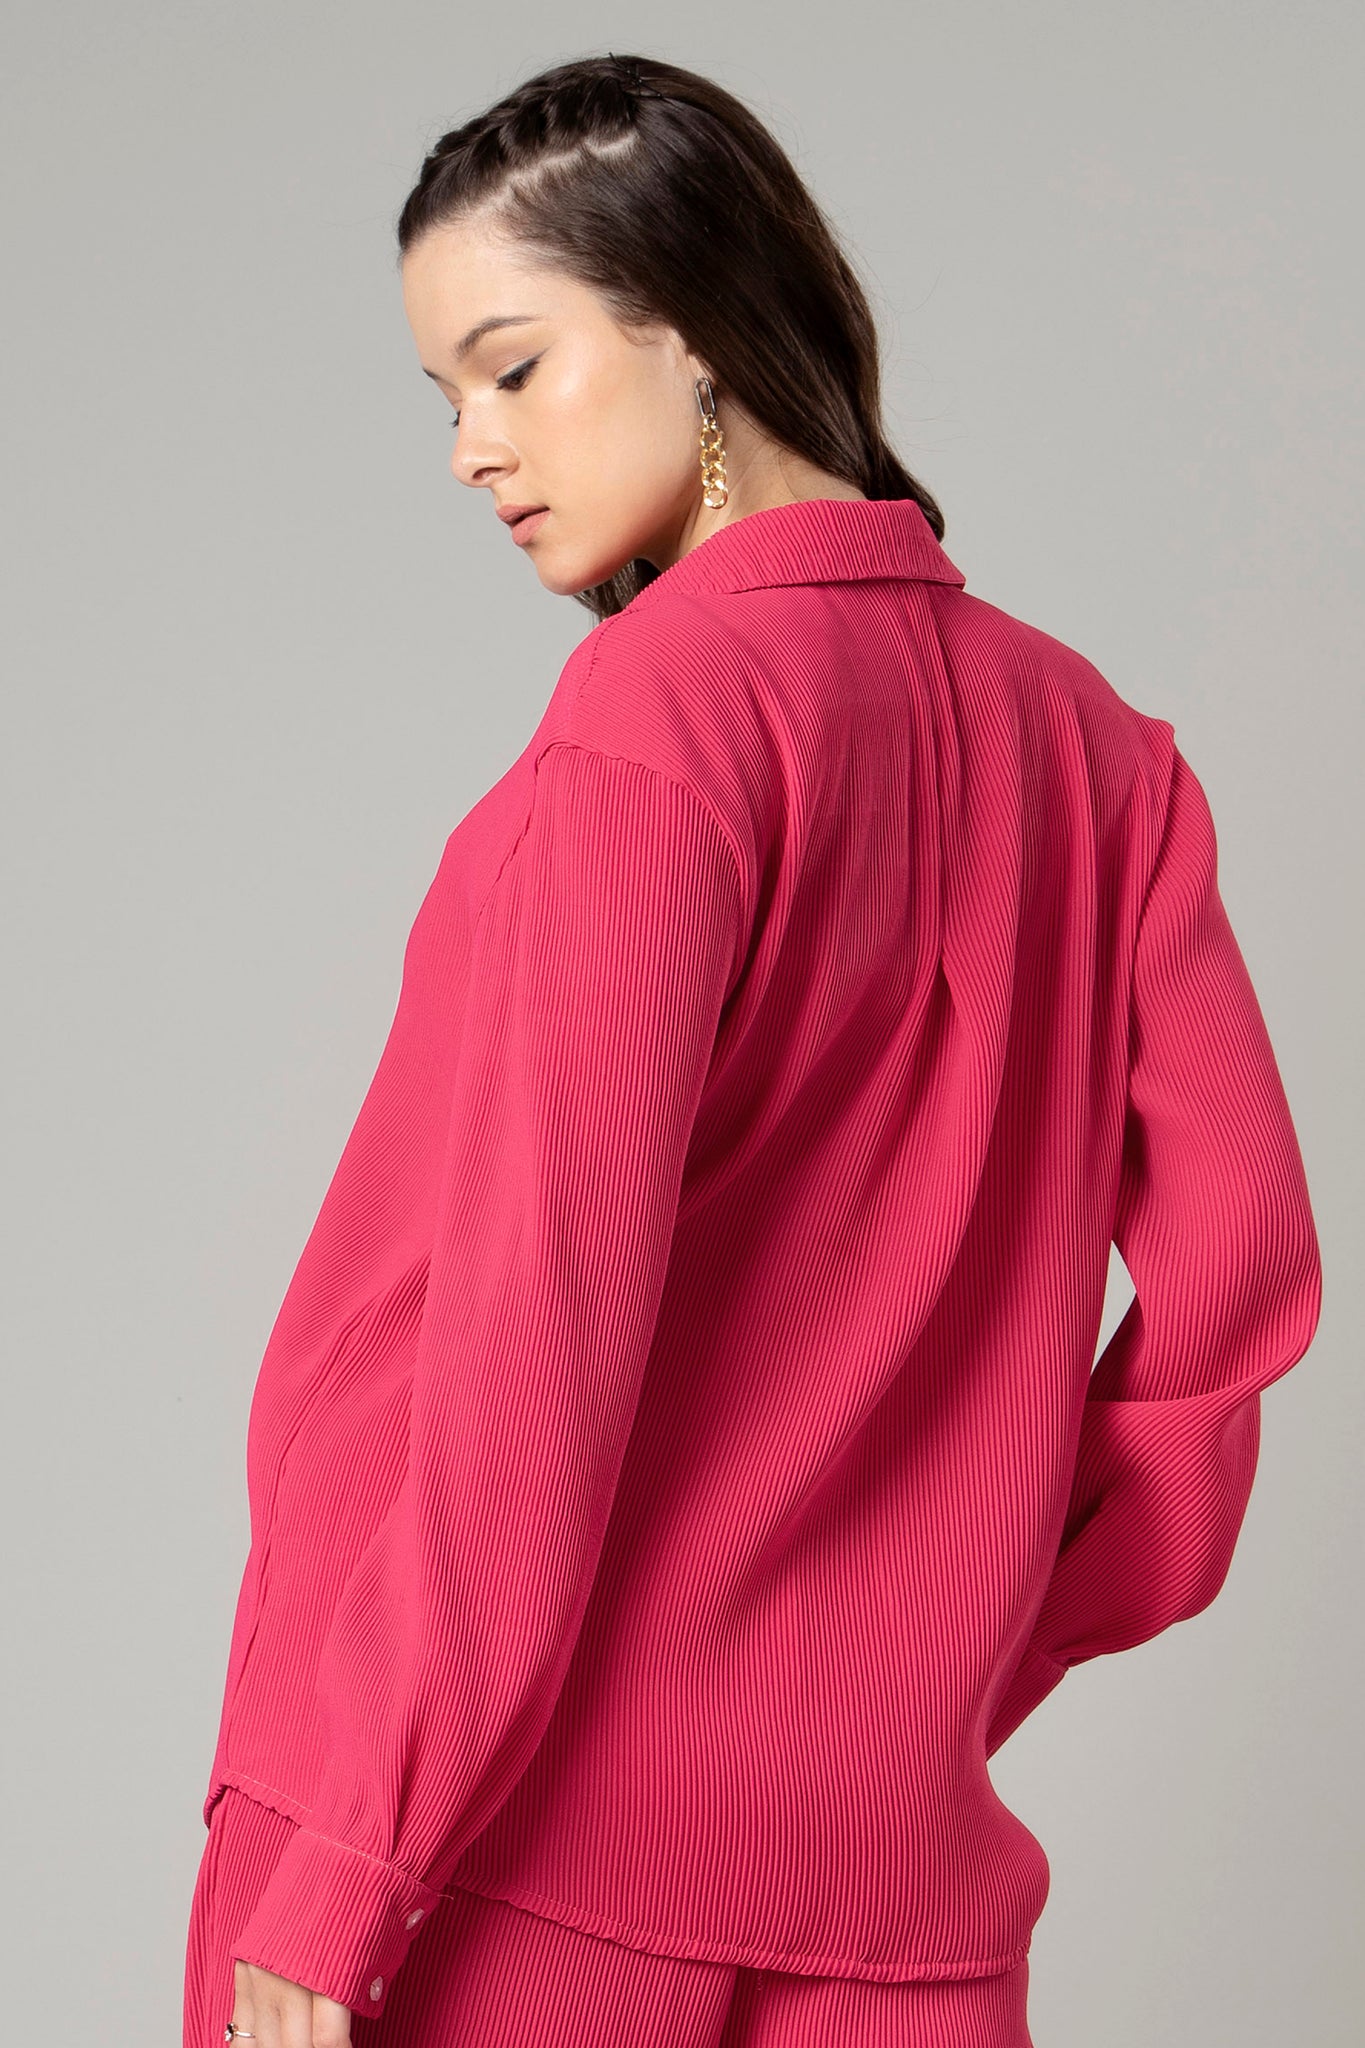 Exclusive Hot Pink Pleated Shirt For Women